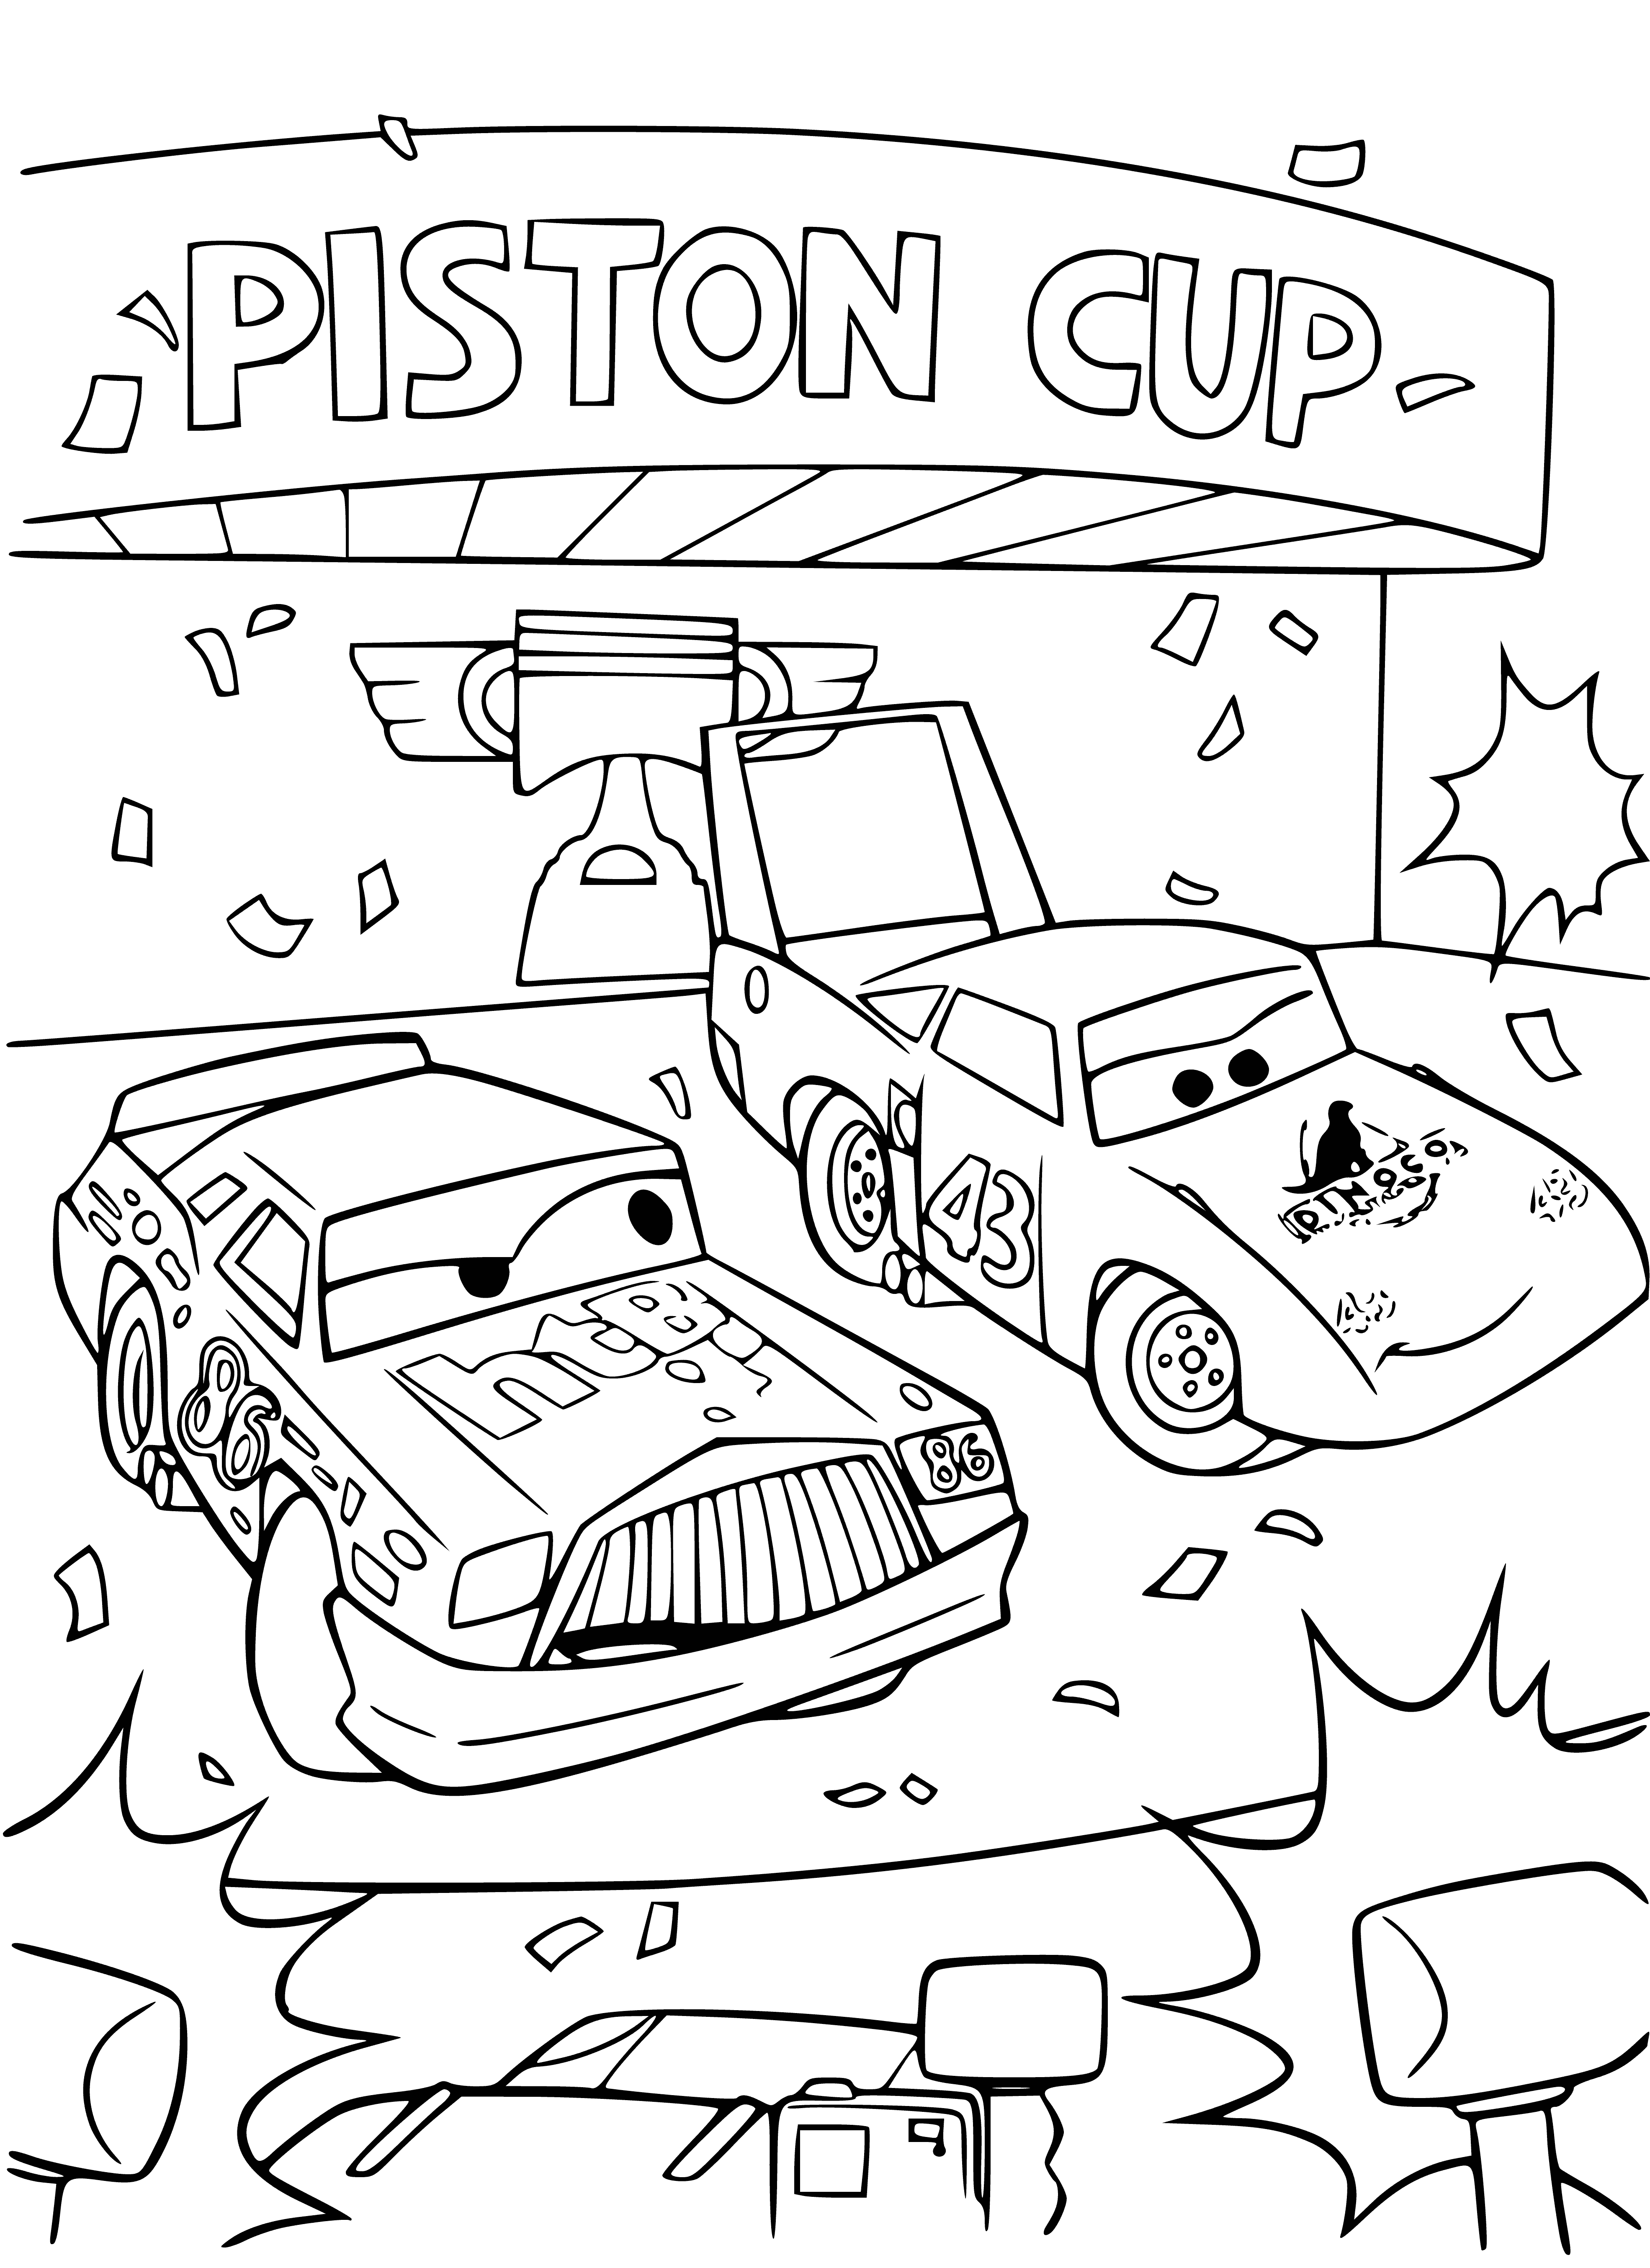 coloring page: Centered on wooden base, gold/silver Piston Cup trophy w/3 silver pistons & 4 car tags. Red banner reads "Piston Cup". #coloringpage